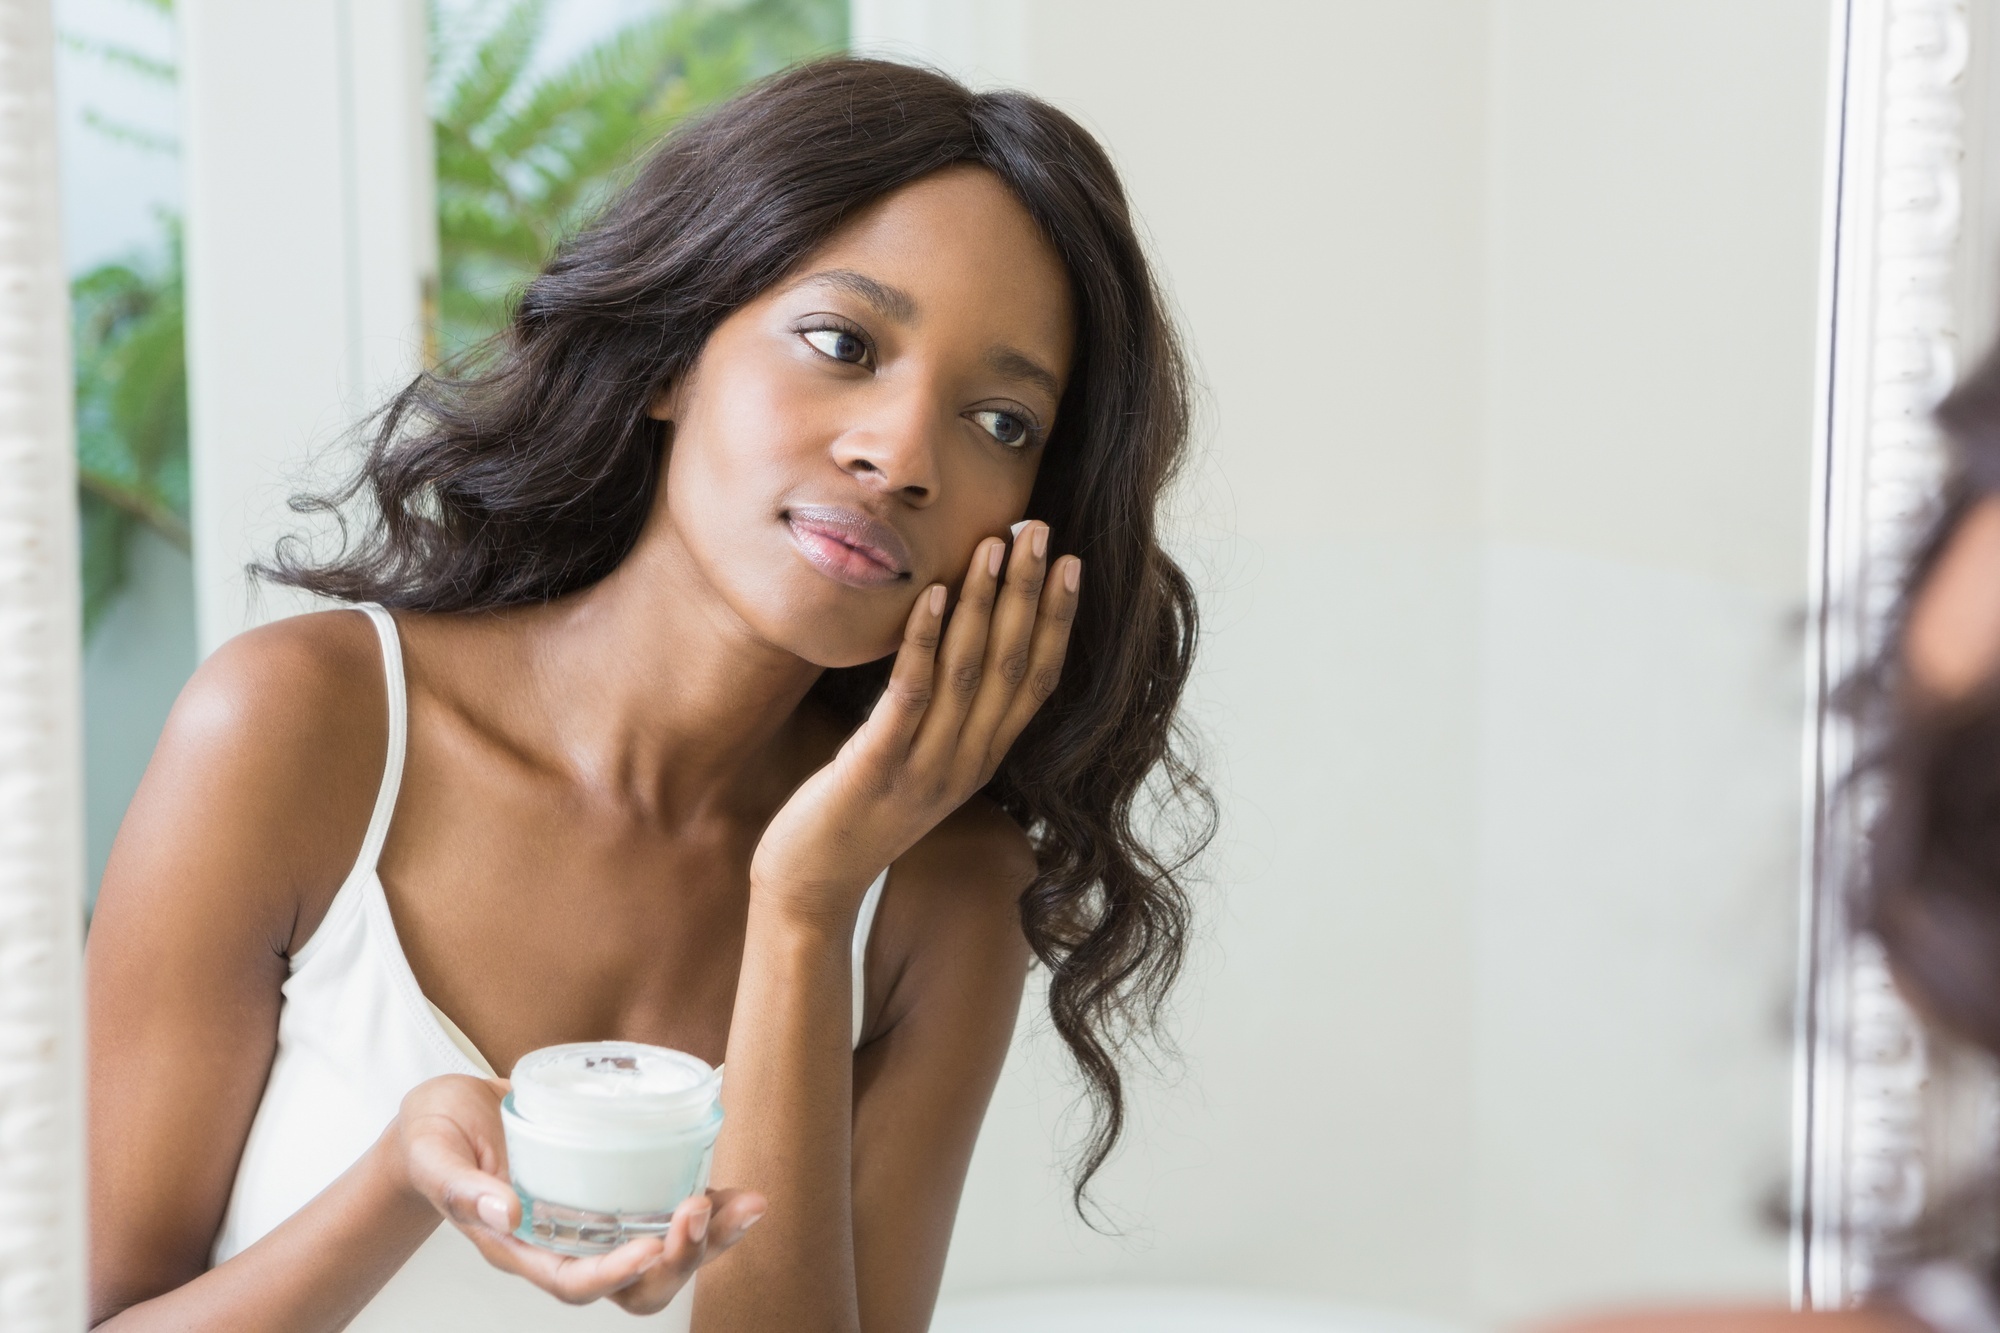 5 Simple Tips to Get Vibrant, Healthy Skin Right Now